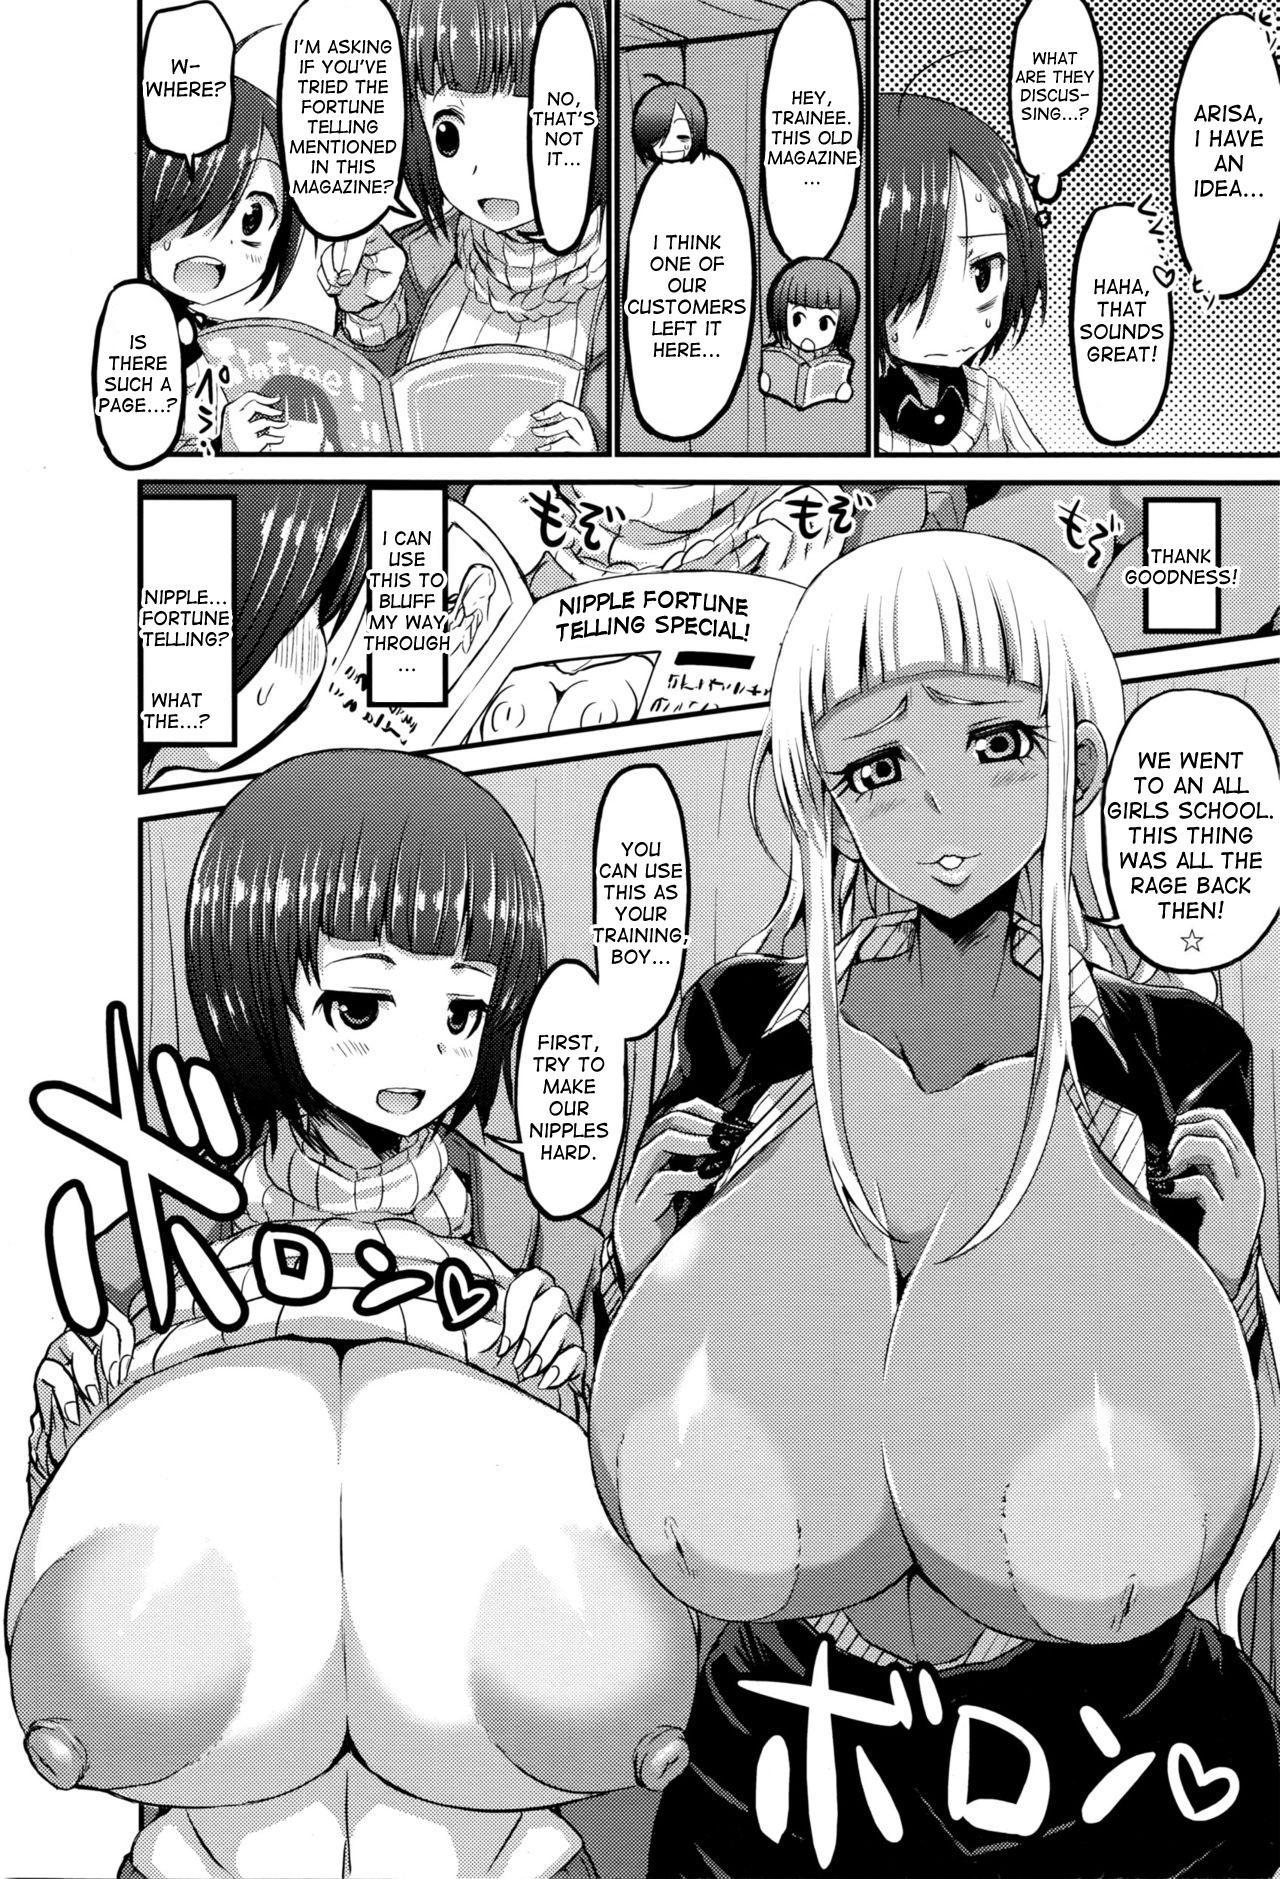 Sex Toys Chikubi Uranai kara no Arekore | This and That After Nipple Fortune Telling Ano - Page 4